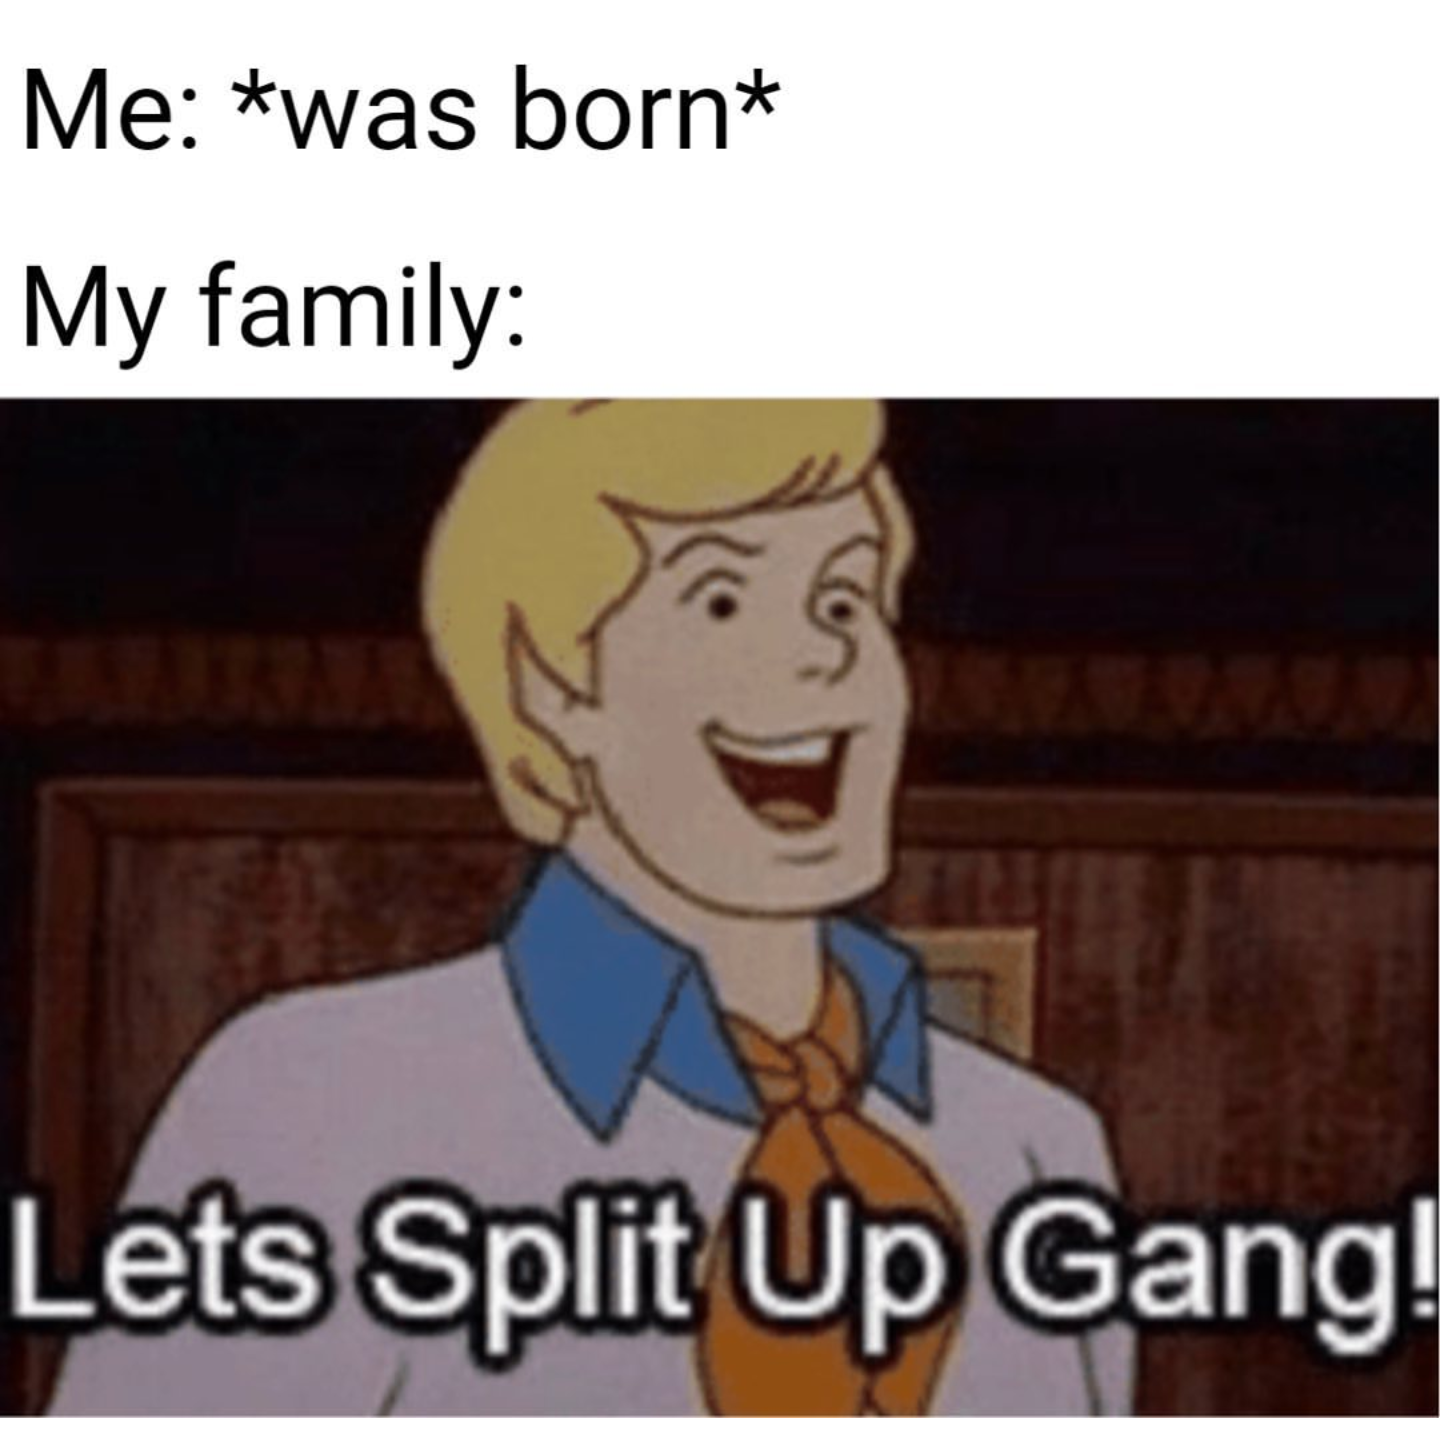 me was born my family lets split up gang - Me was born My family Lets Split Up Gang!